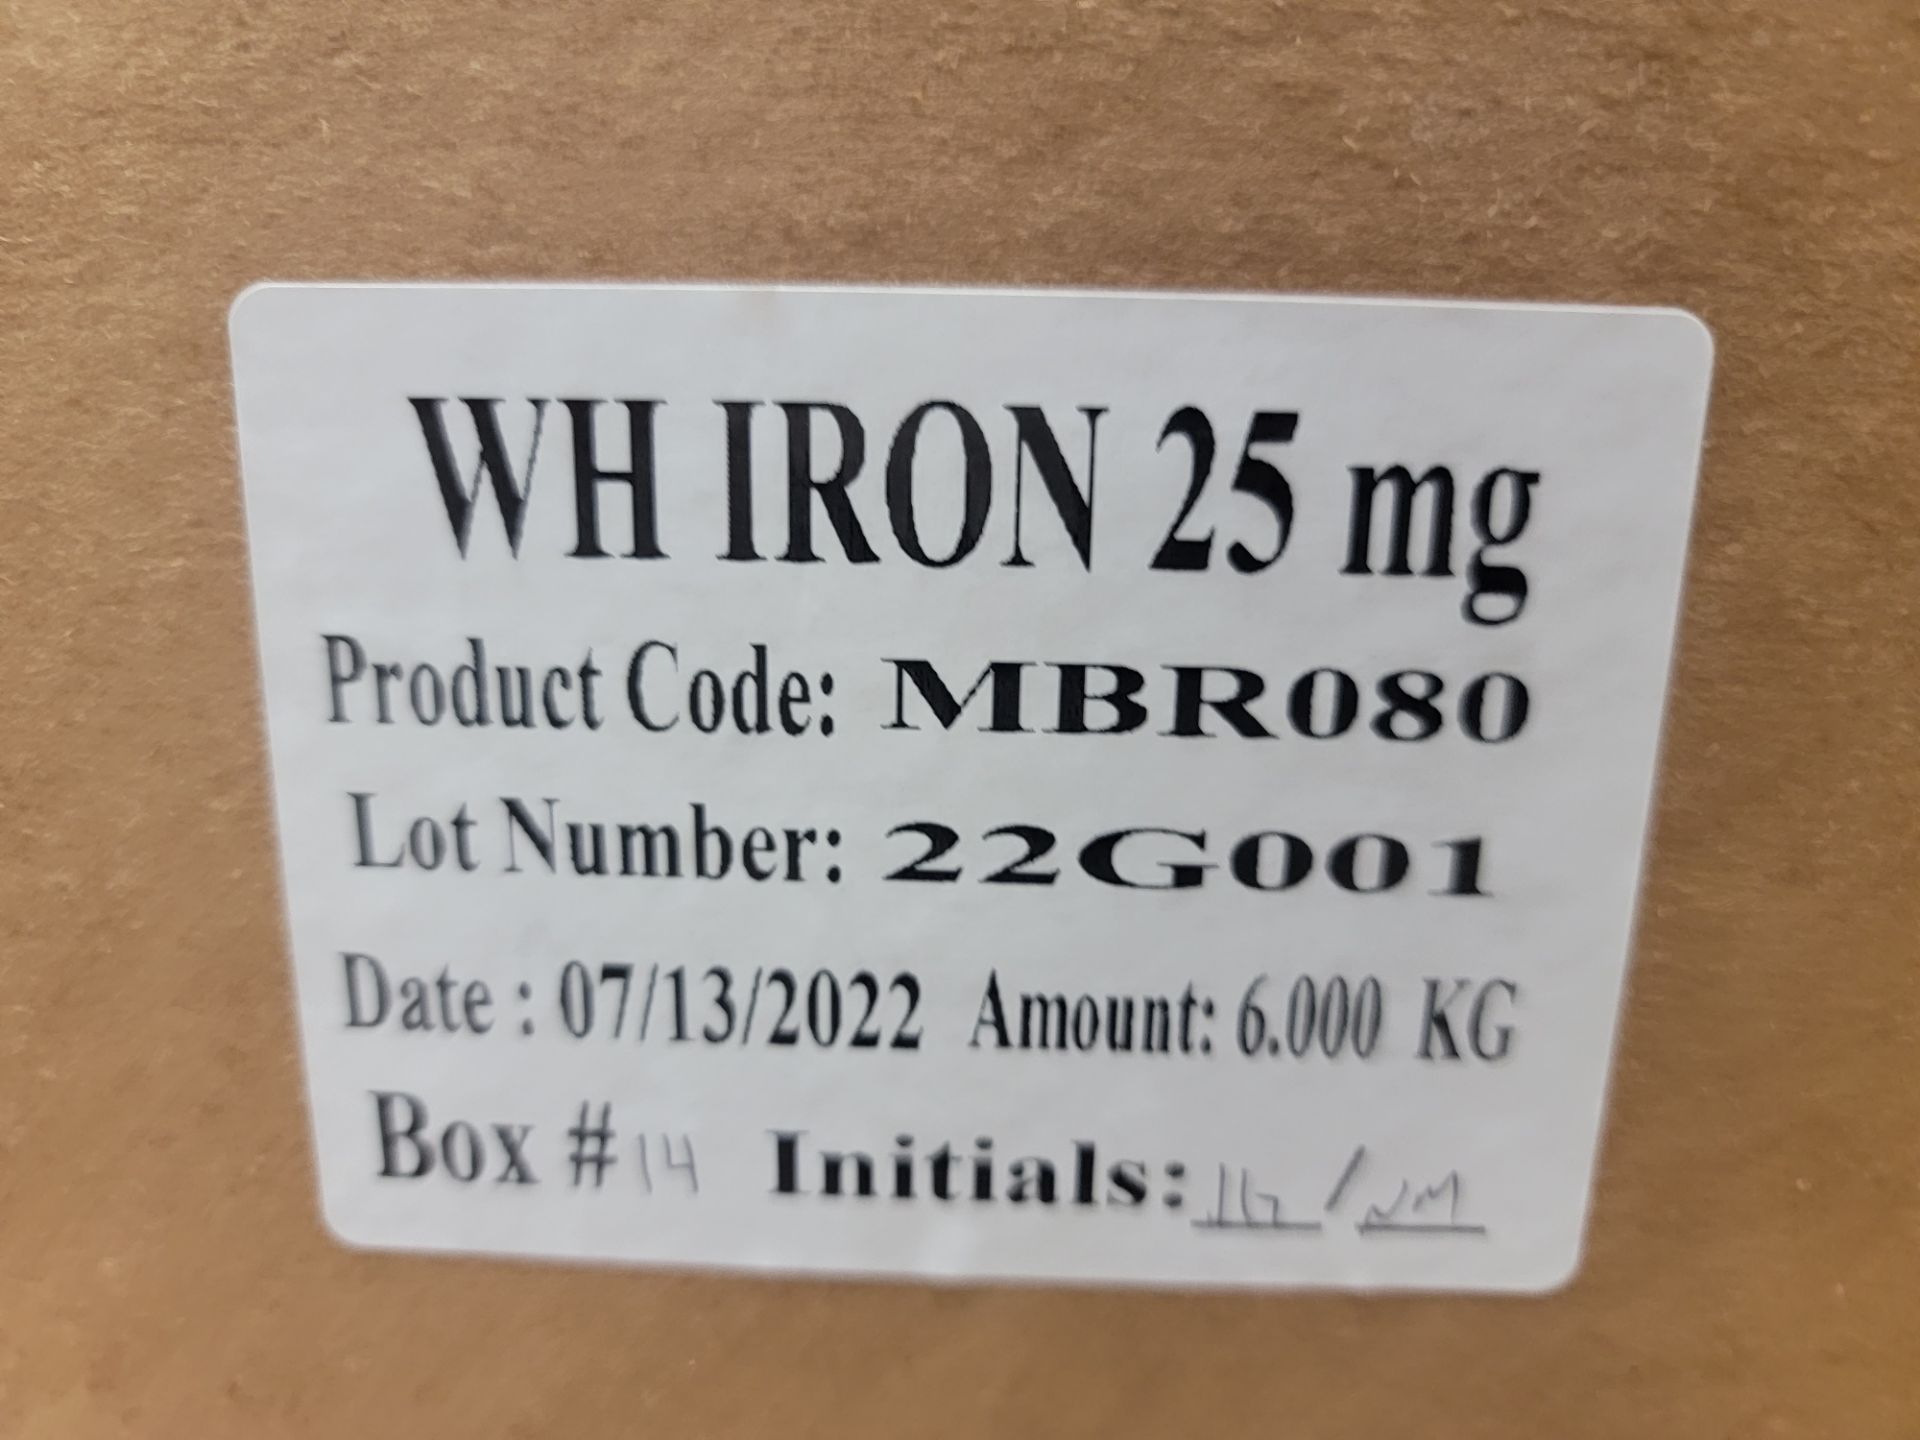 CASES OF WH IRON 25MG TABLETS BAG - Image 2 of 3